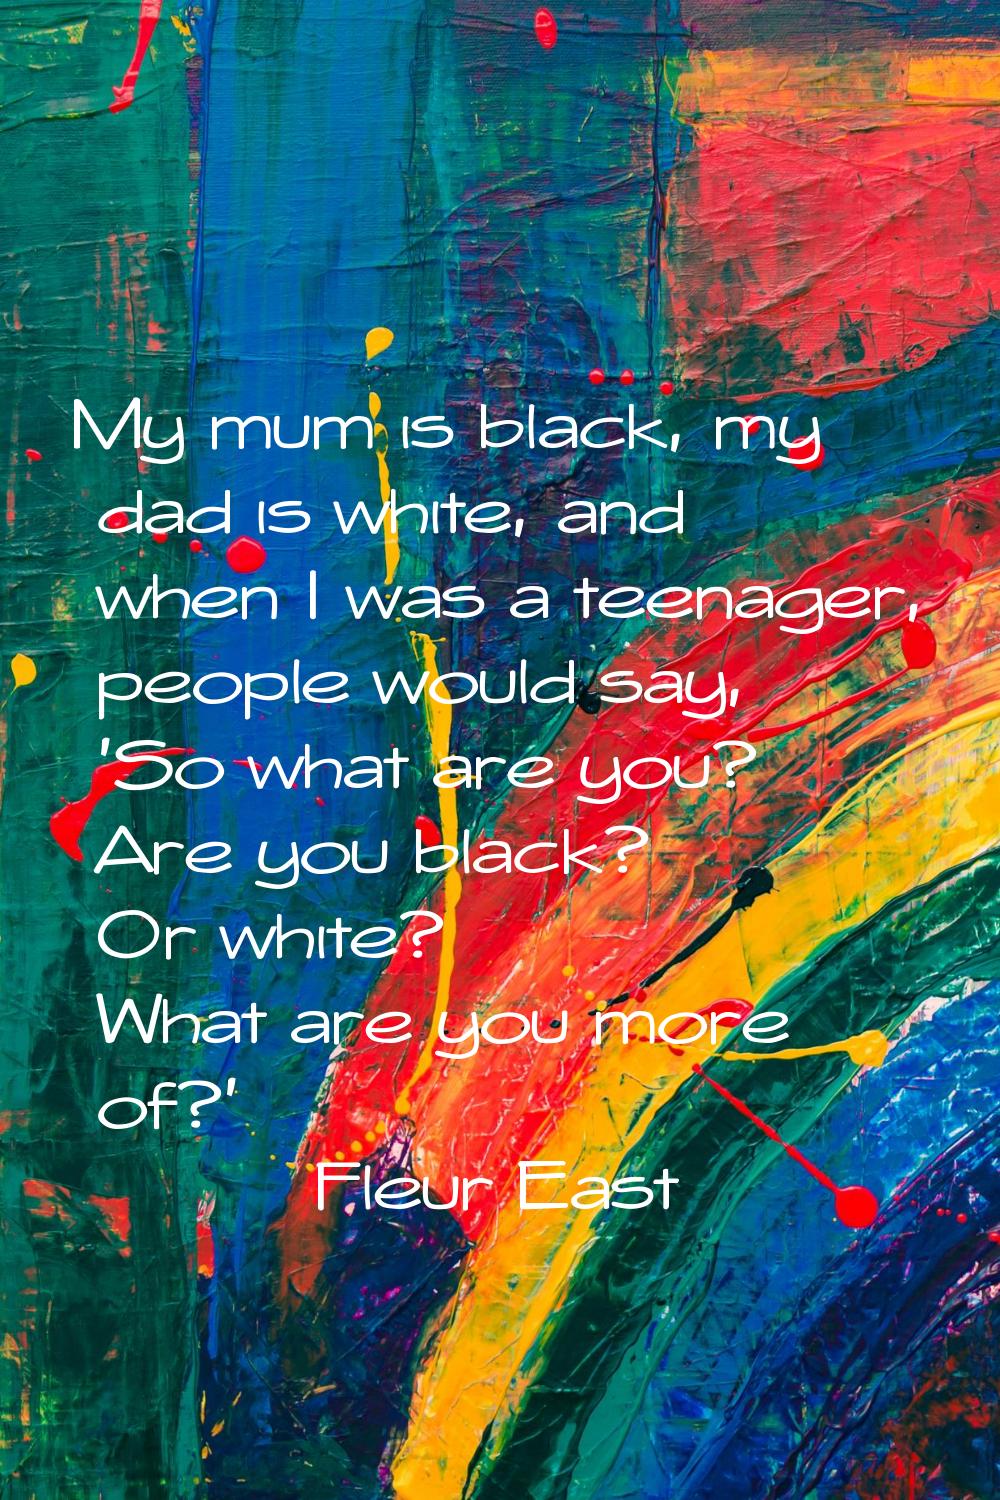 My mum is black, my dad is white, and when I was a teenager, people would say, 'So what are you? Ar